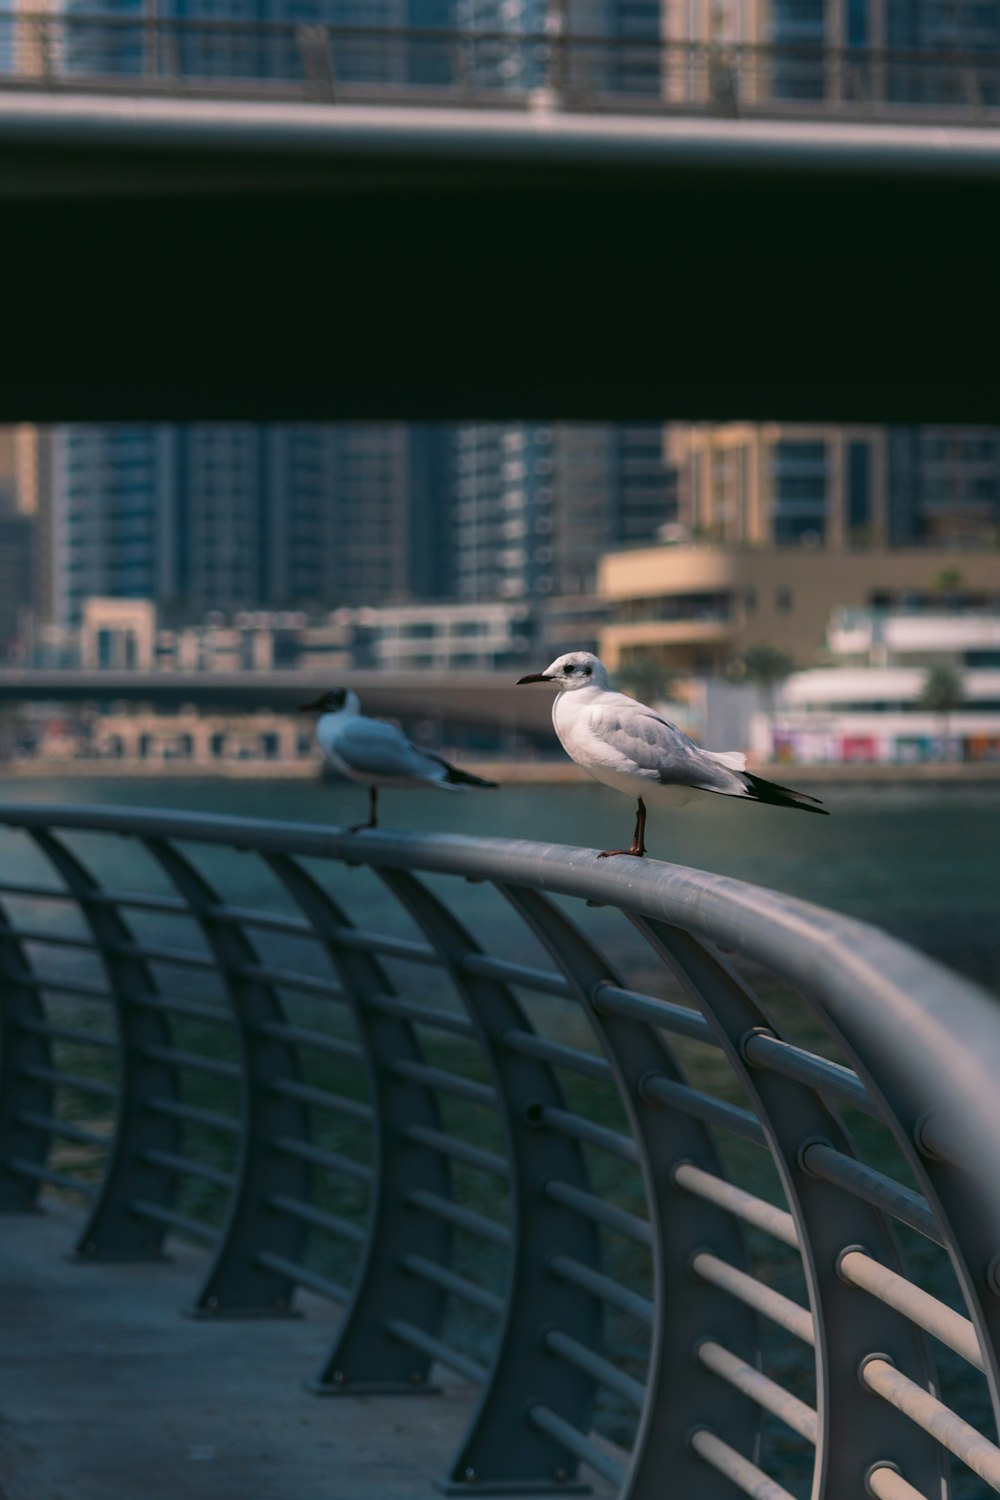 two seagulls are perched on a railing by the water